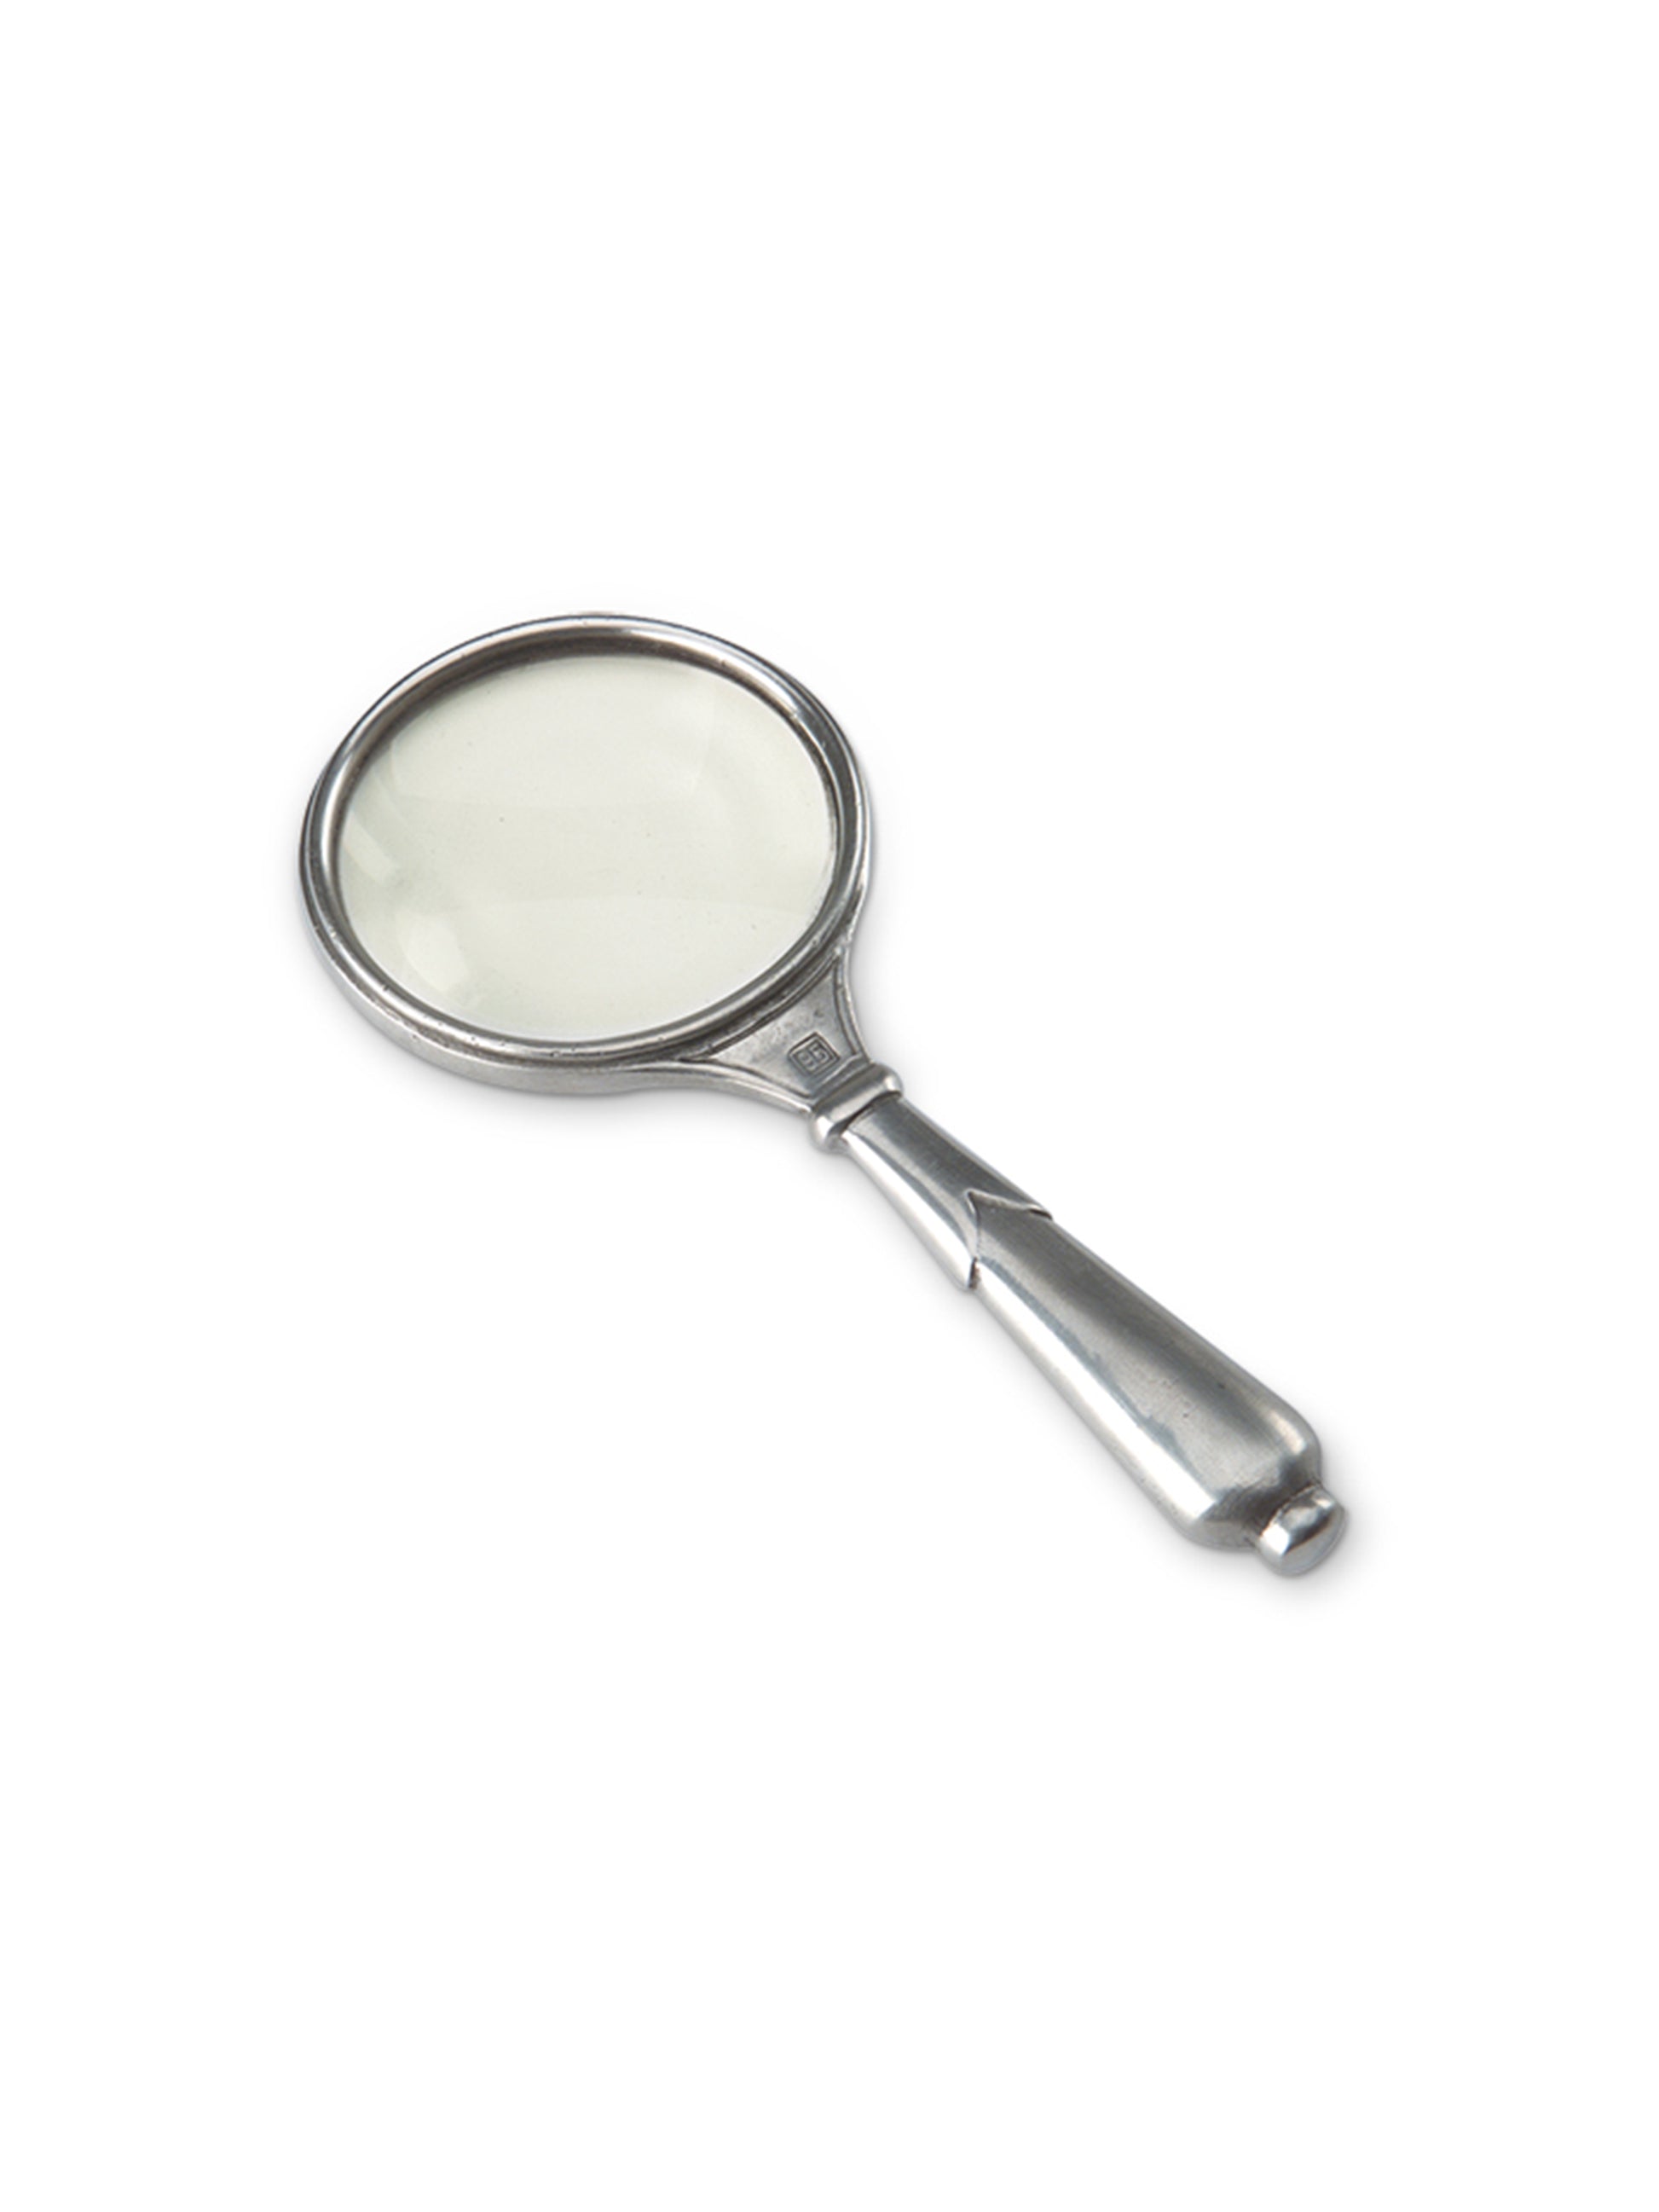 MATCH Pewter Magnifying Glass Weston Table